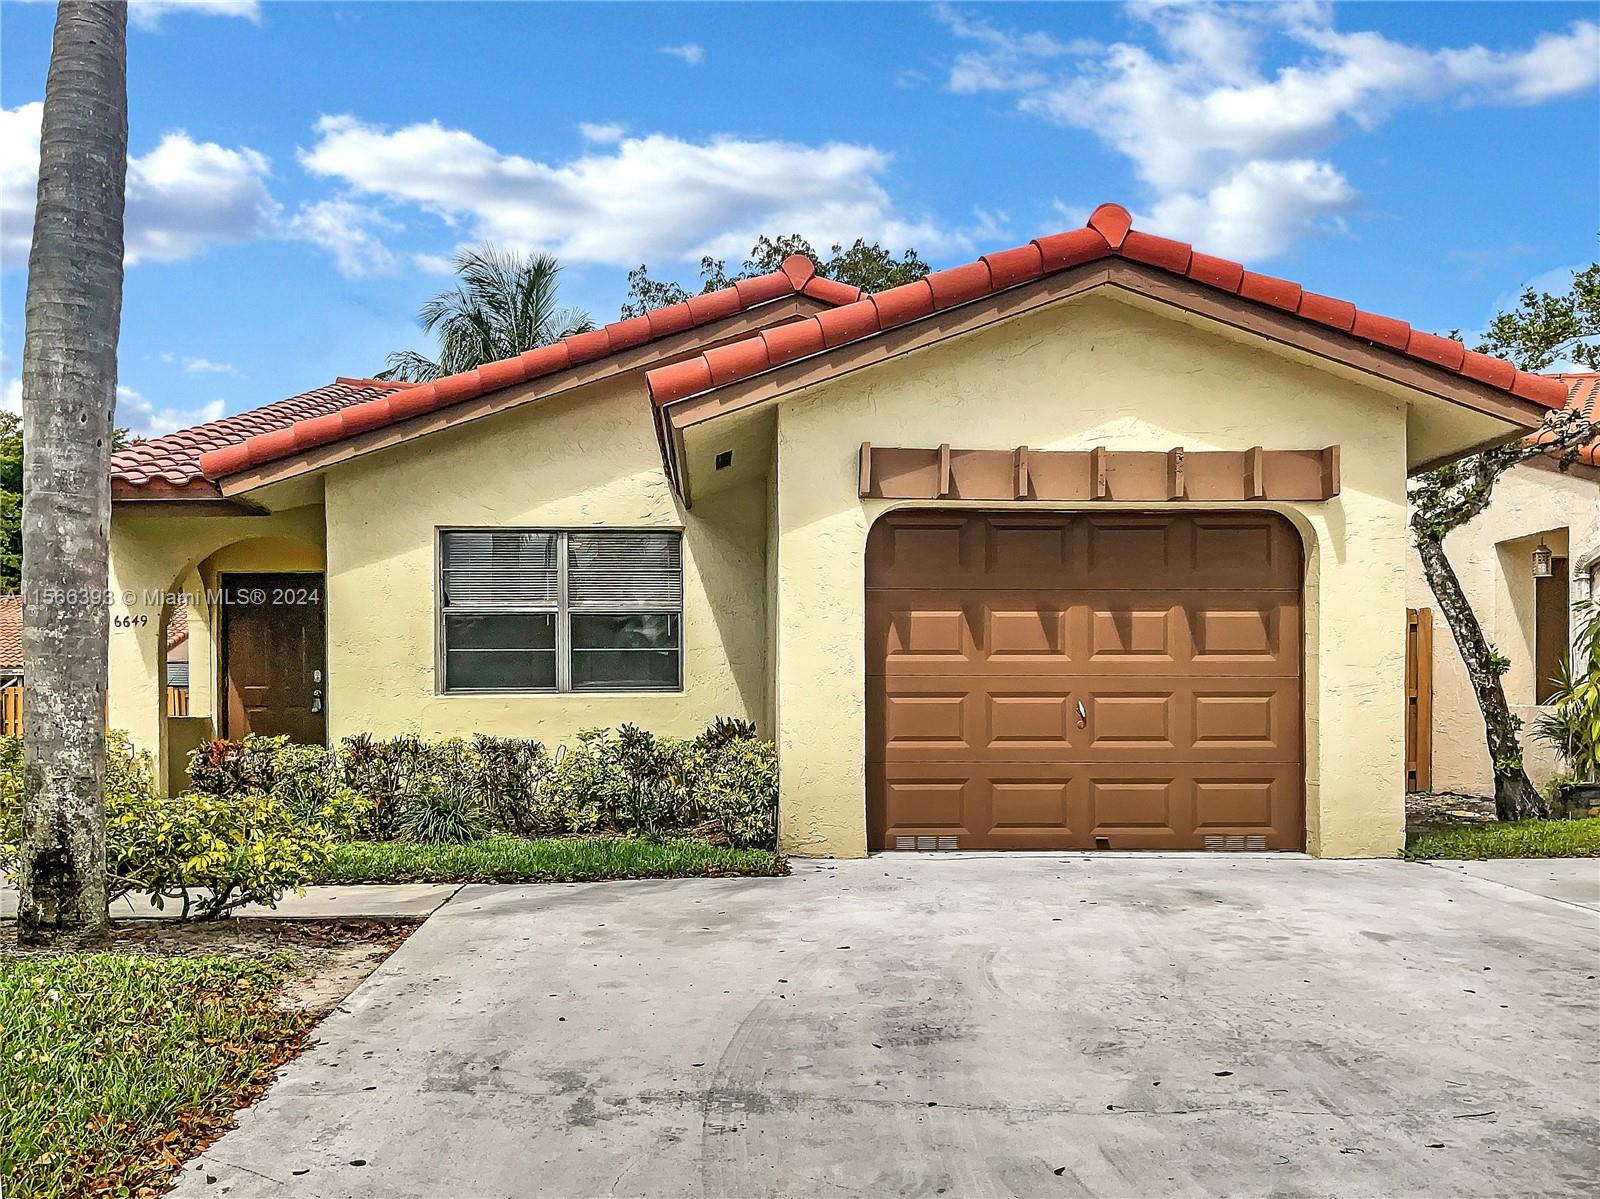 Property for Sale at 6649 Nw 176th Ter, Hialeah, Miami-Dade County, Florida - Bedrooms: 3 
Bathrooms: 2  - $526,000